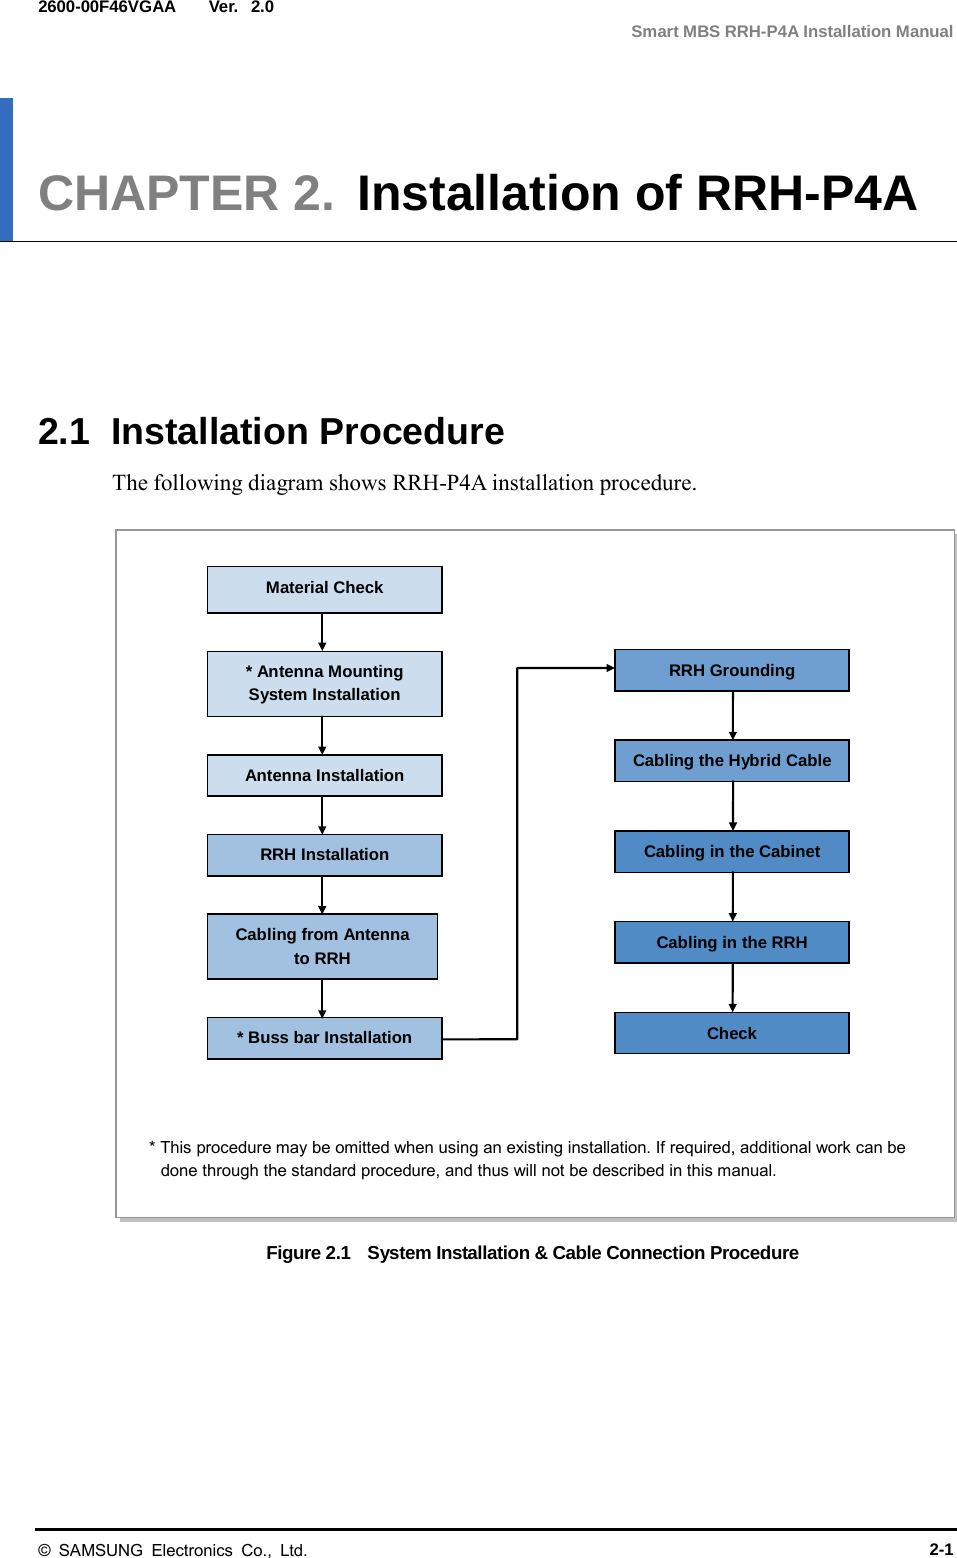  Ver.  Smart MBS RRH-P4A Installation Manual 2600-00F46VGAA 2.0 CHAPTER 2.  Installation of RRH-P4A      2.1  Installation Procedure The following diagram shows RRH-P4A installation procedure.  Figure 2.1    System Installation &amp; Cable Connection Procedure   Cabling in the Cabinet Cabling the Hybrid Cable Check * This procedure may be omitted when using an existing installation. If required, additional work can be done through the standard procedure, and thus will not be described in this manual. Antenna Installation Material Check * Antenna Mounting System Installation Cabling from Antenna to RRH RRH Installation * Buss bar Installation RRH Grounding Cabling in the RRH  © SAMSUNG Electronics Co., Ltd. 2-1 